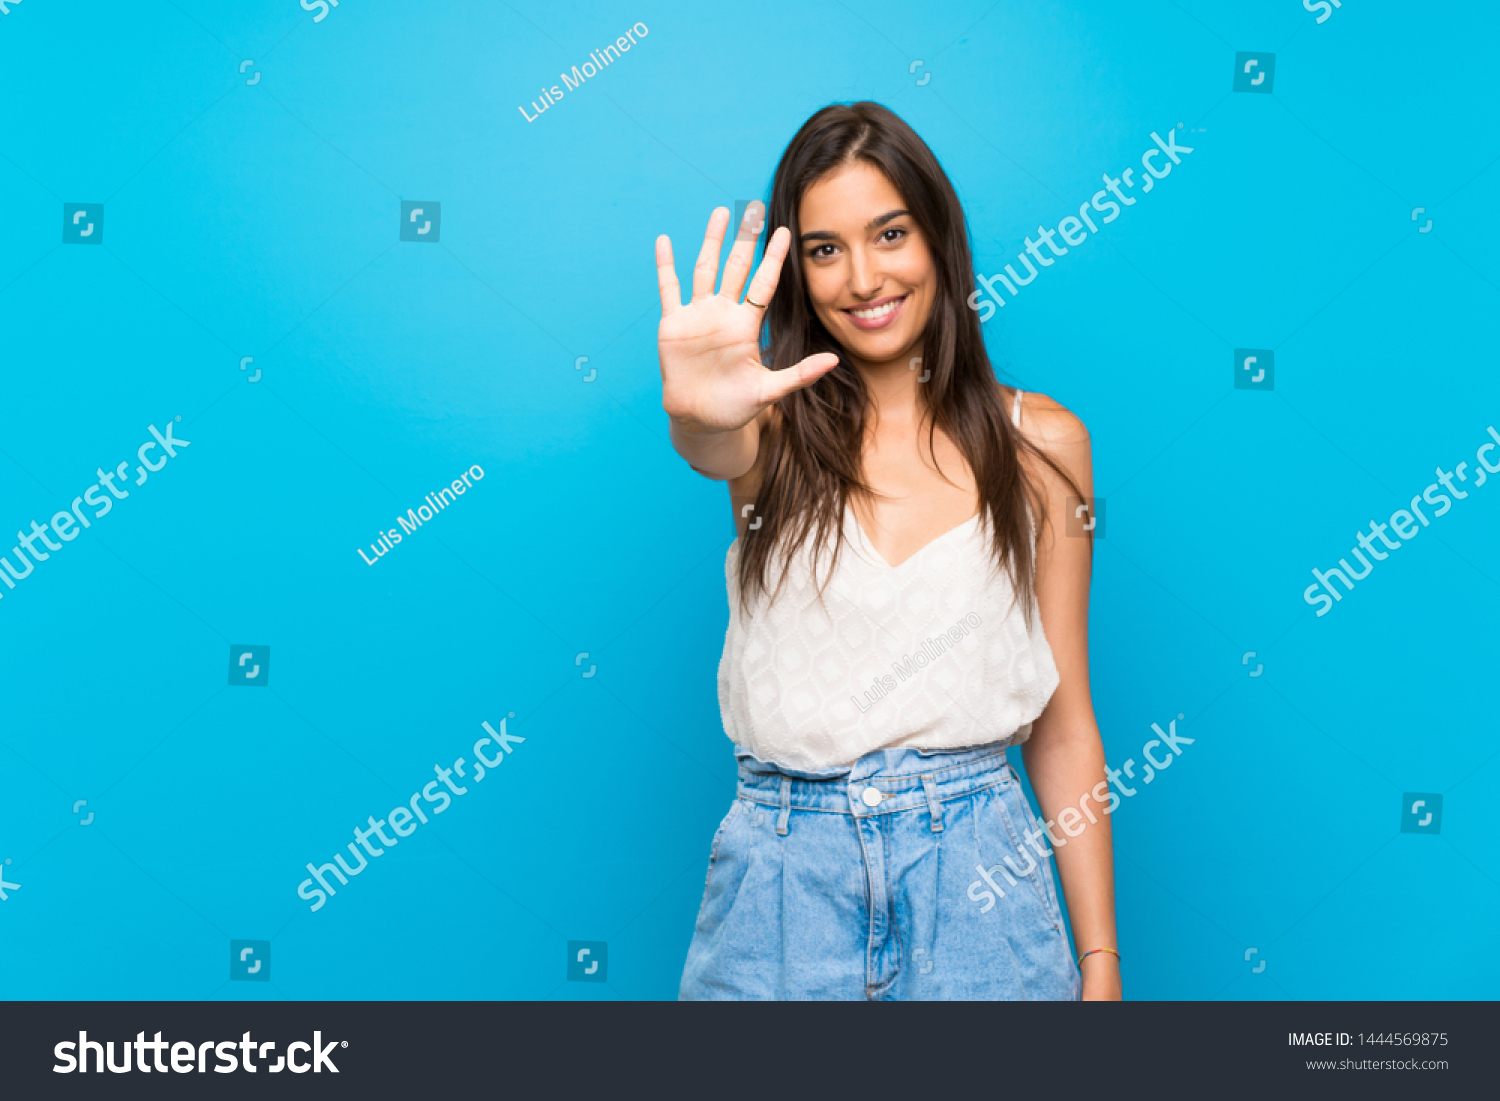 Young woman over isolated blue background counting five with fingers #1444569875